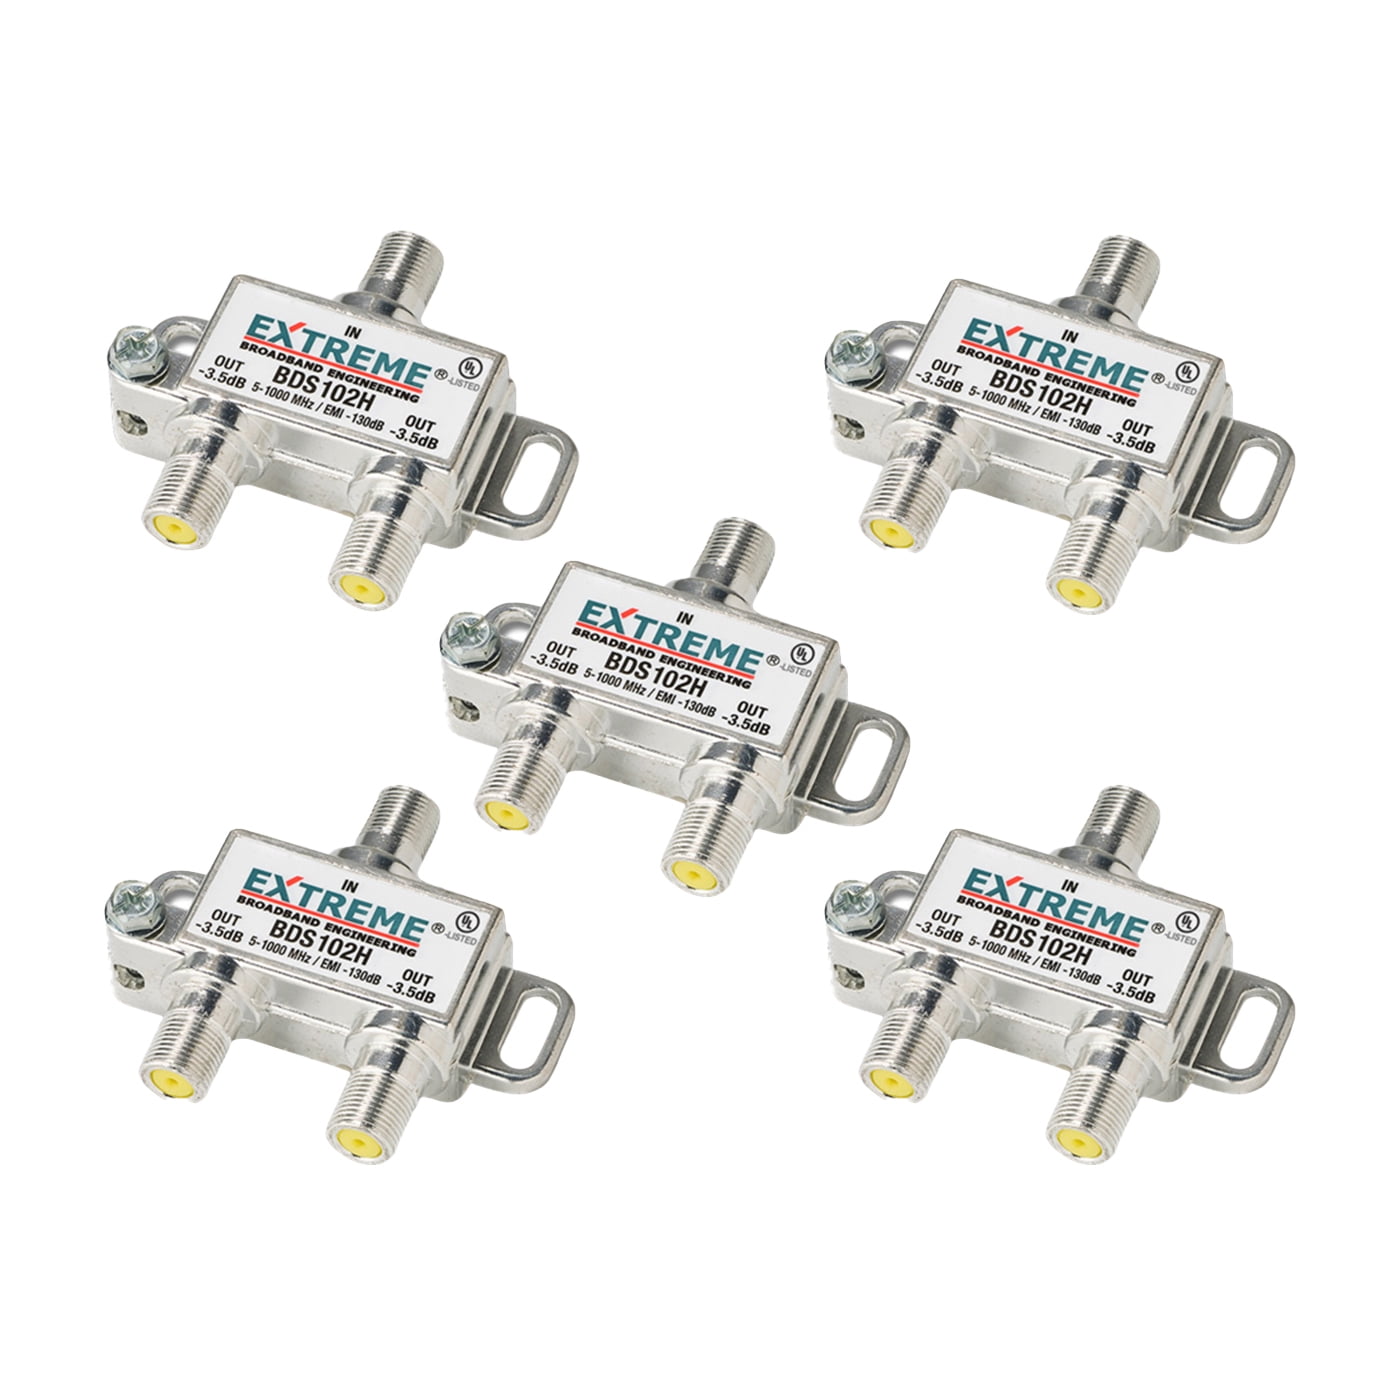 BDS102H cableTVamps 2 Way Extreme HD Digital 1GHz HIGH Performance Coax Cable Splitter 3 Pack 